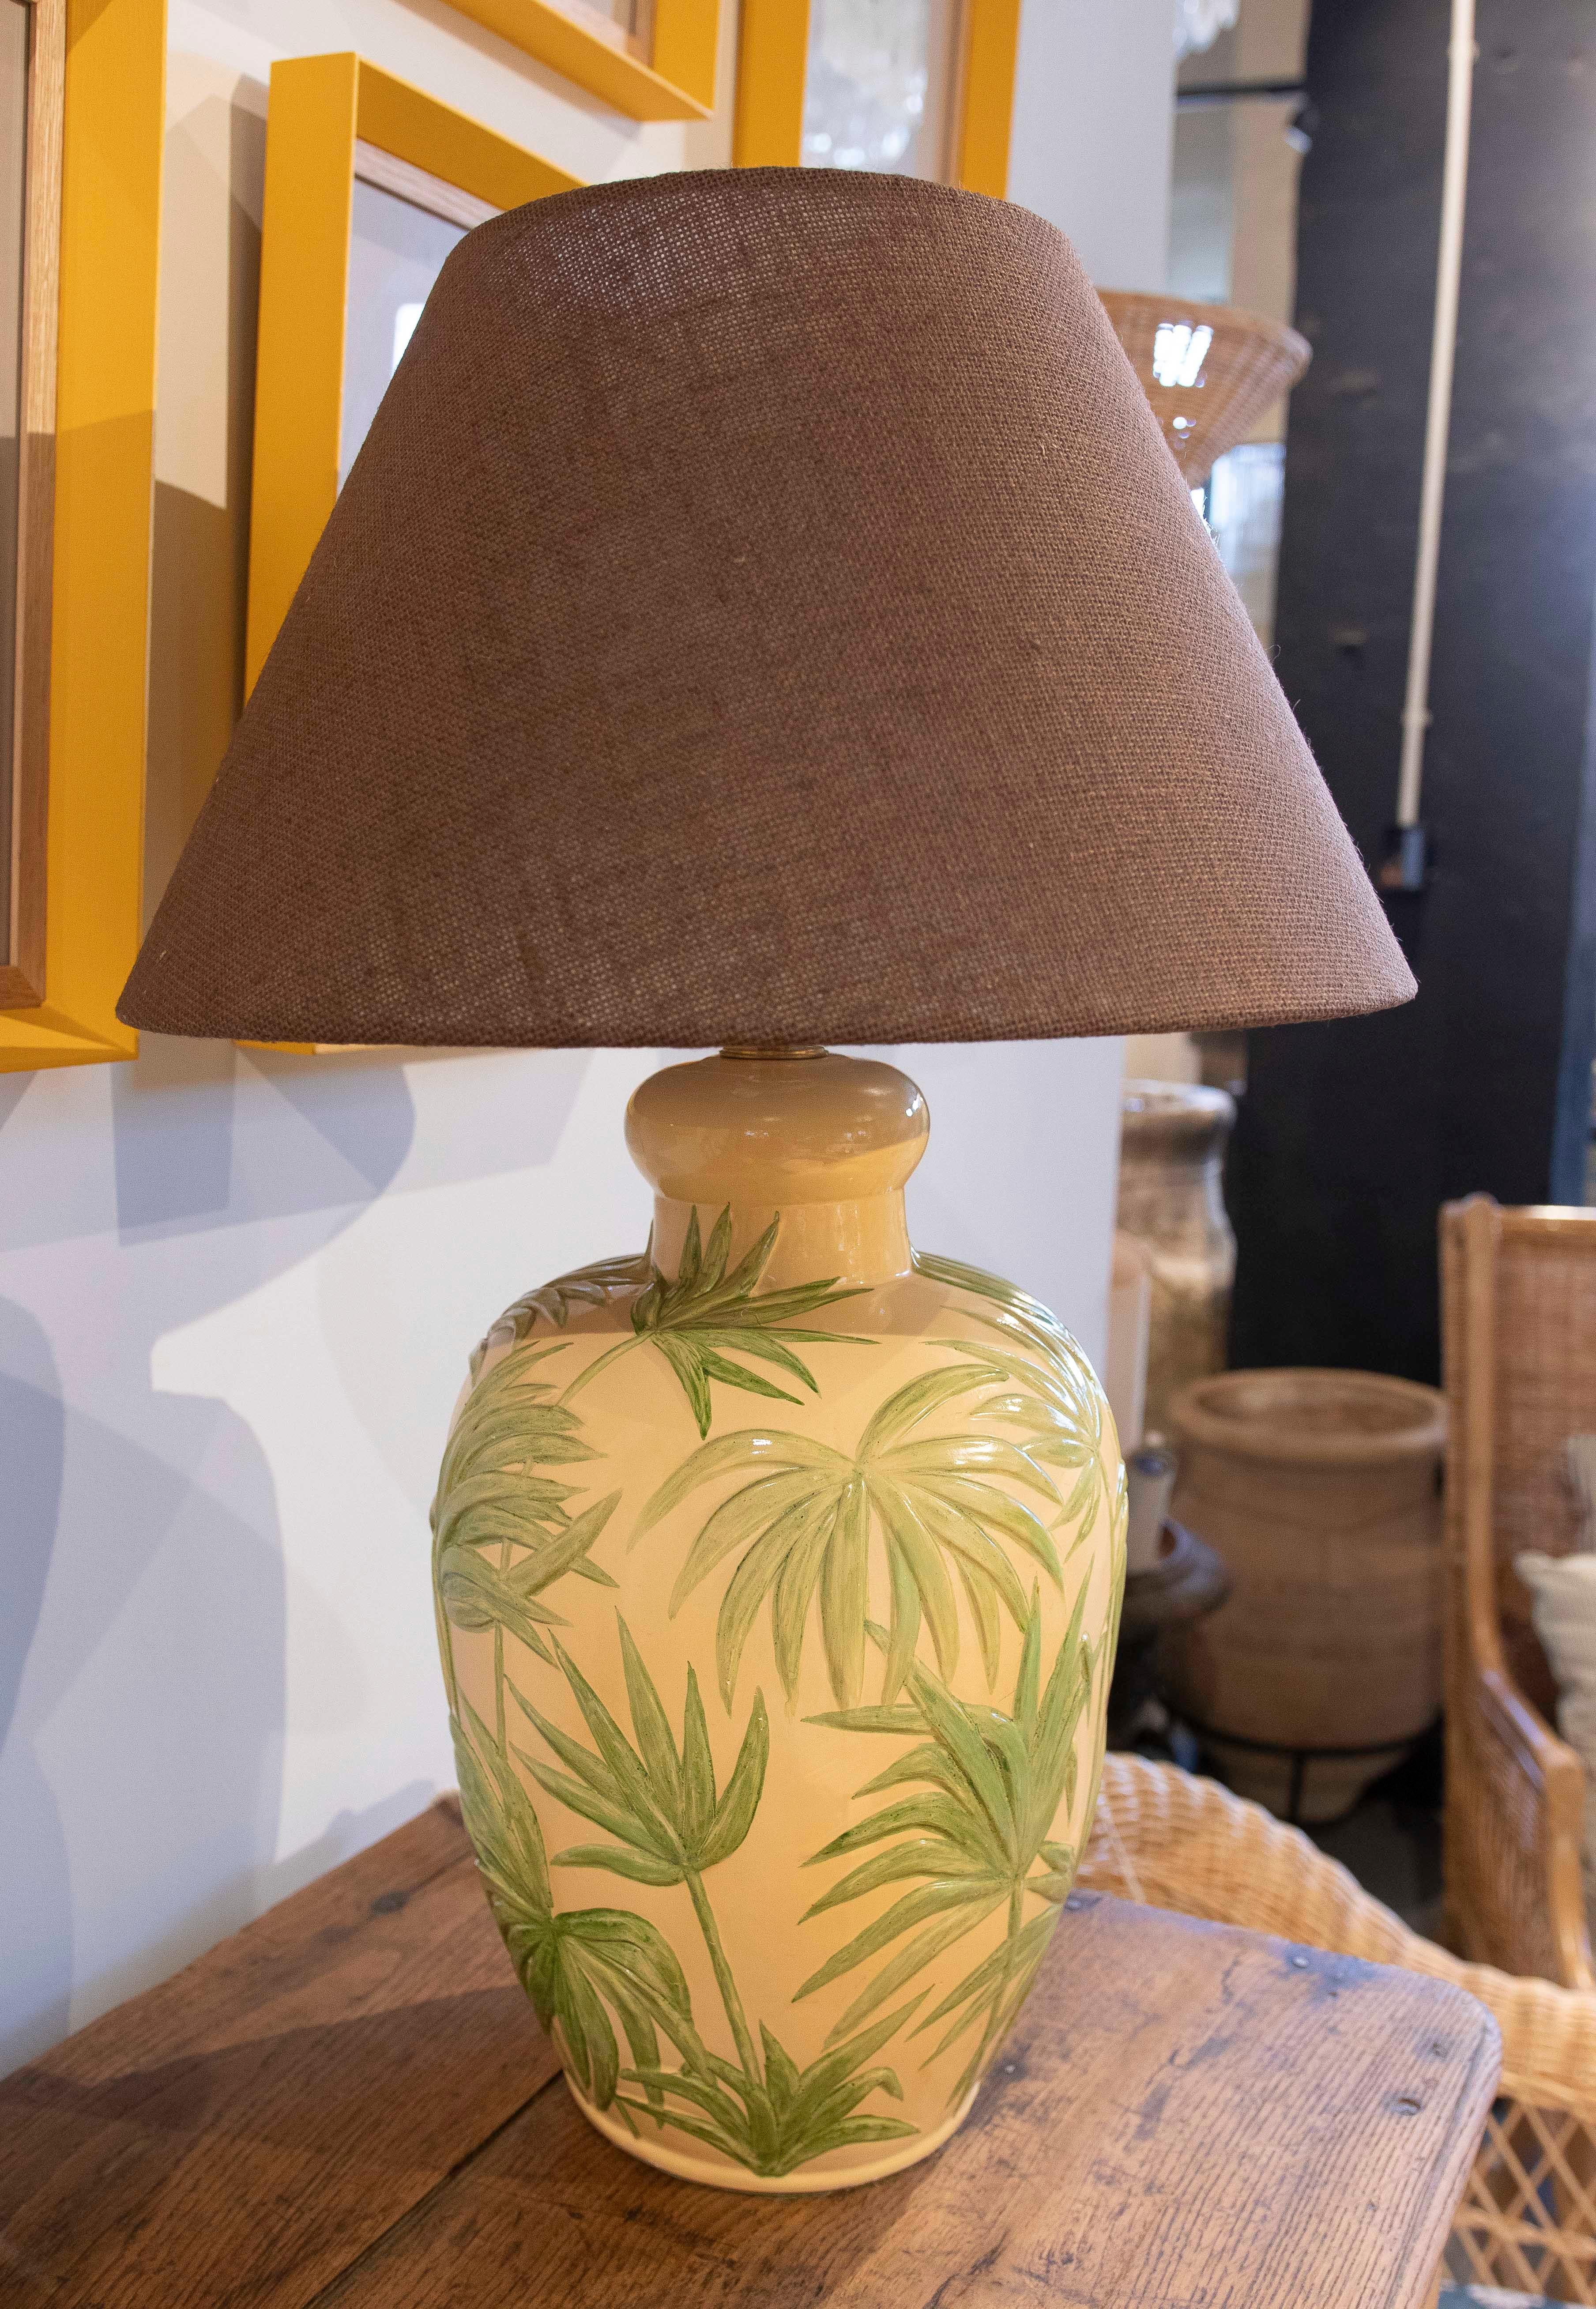 1970s Ceramic Lamp with Palm Tree Decoration  For Sale 1